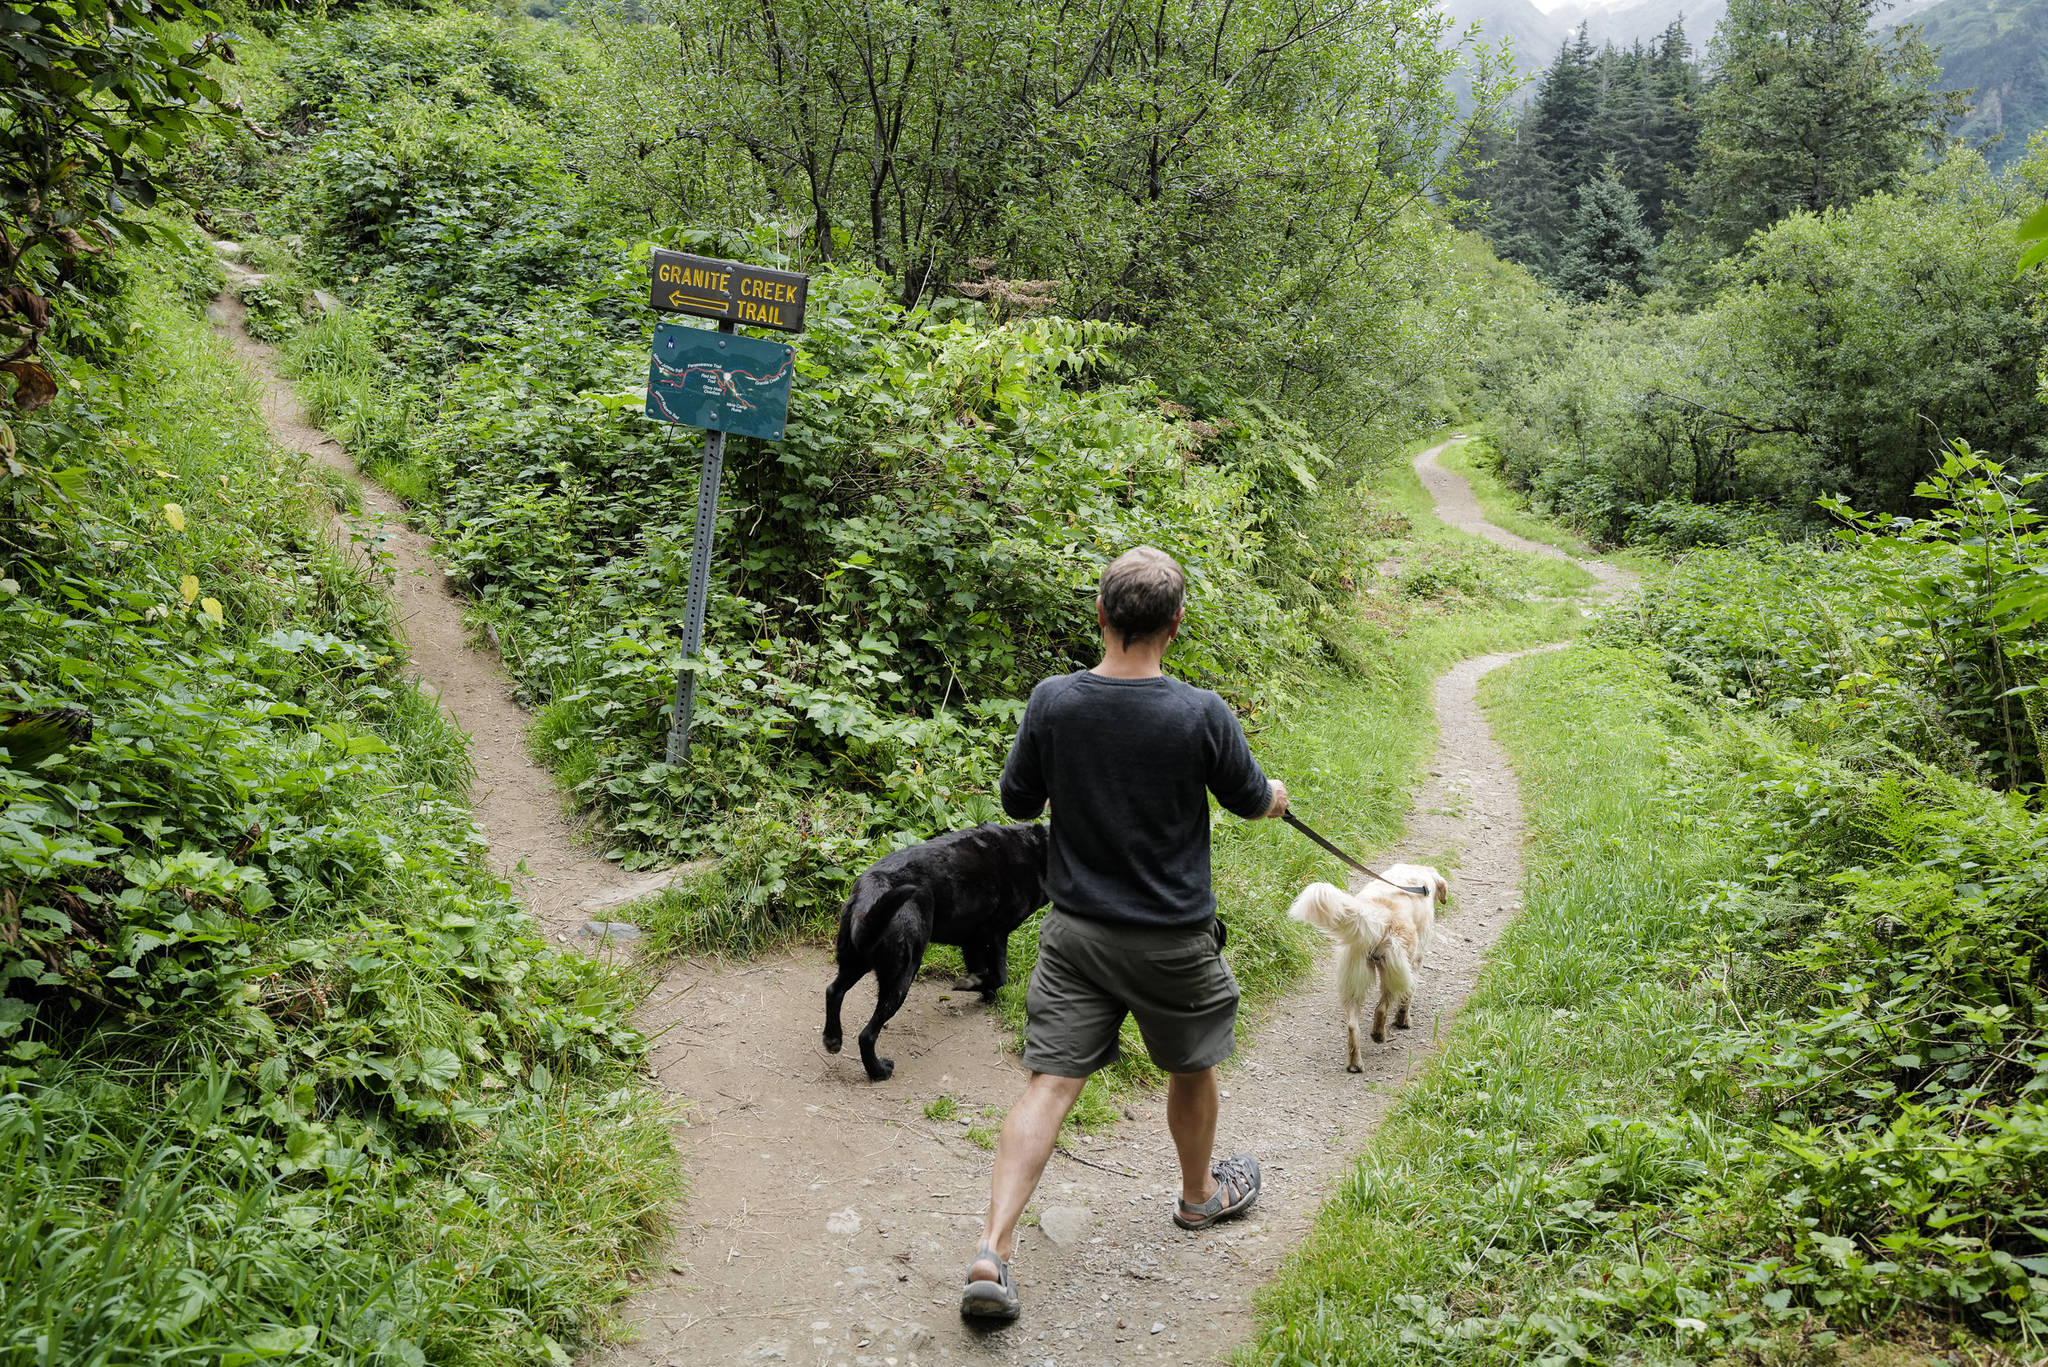 A dog walker on Perseverance Trail at the granite Creek Trail spur on Wednesday, Aug. 14, 2019. (Michael Penn | Juneau Empire)